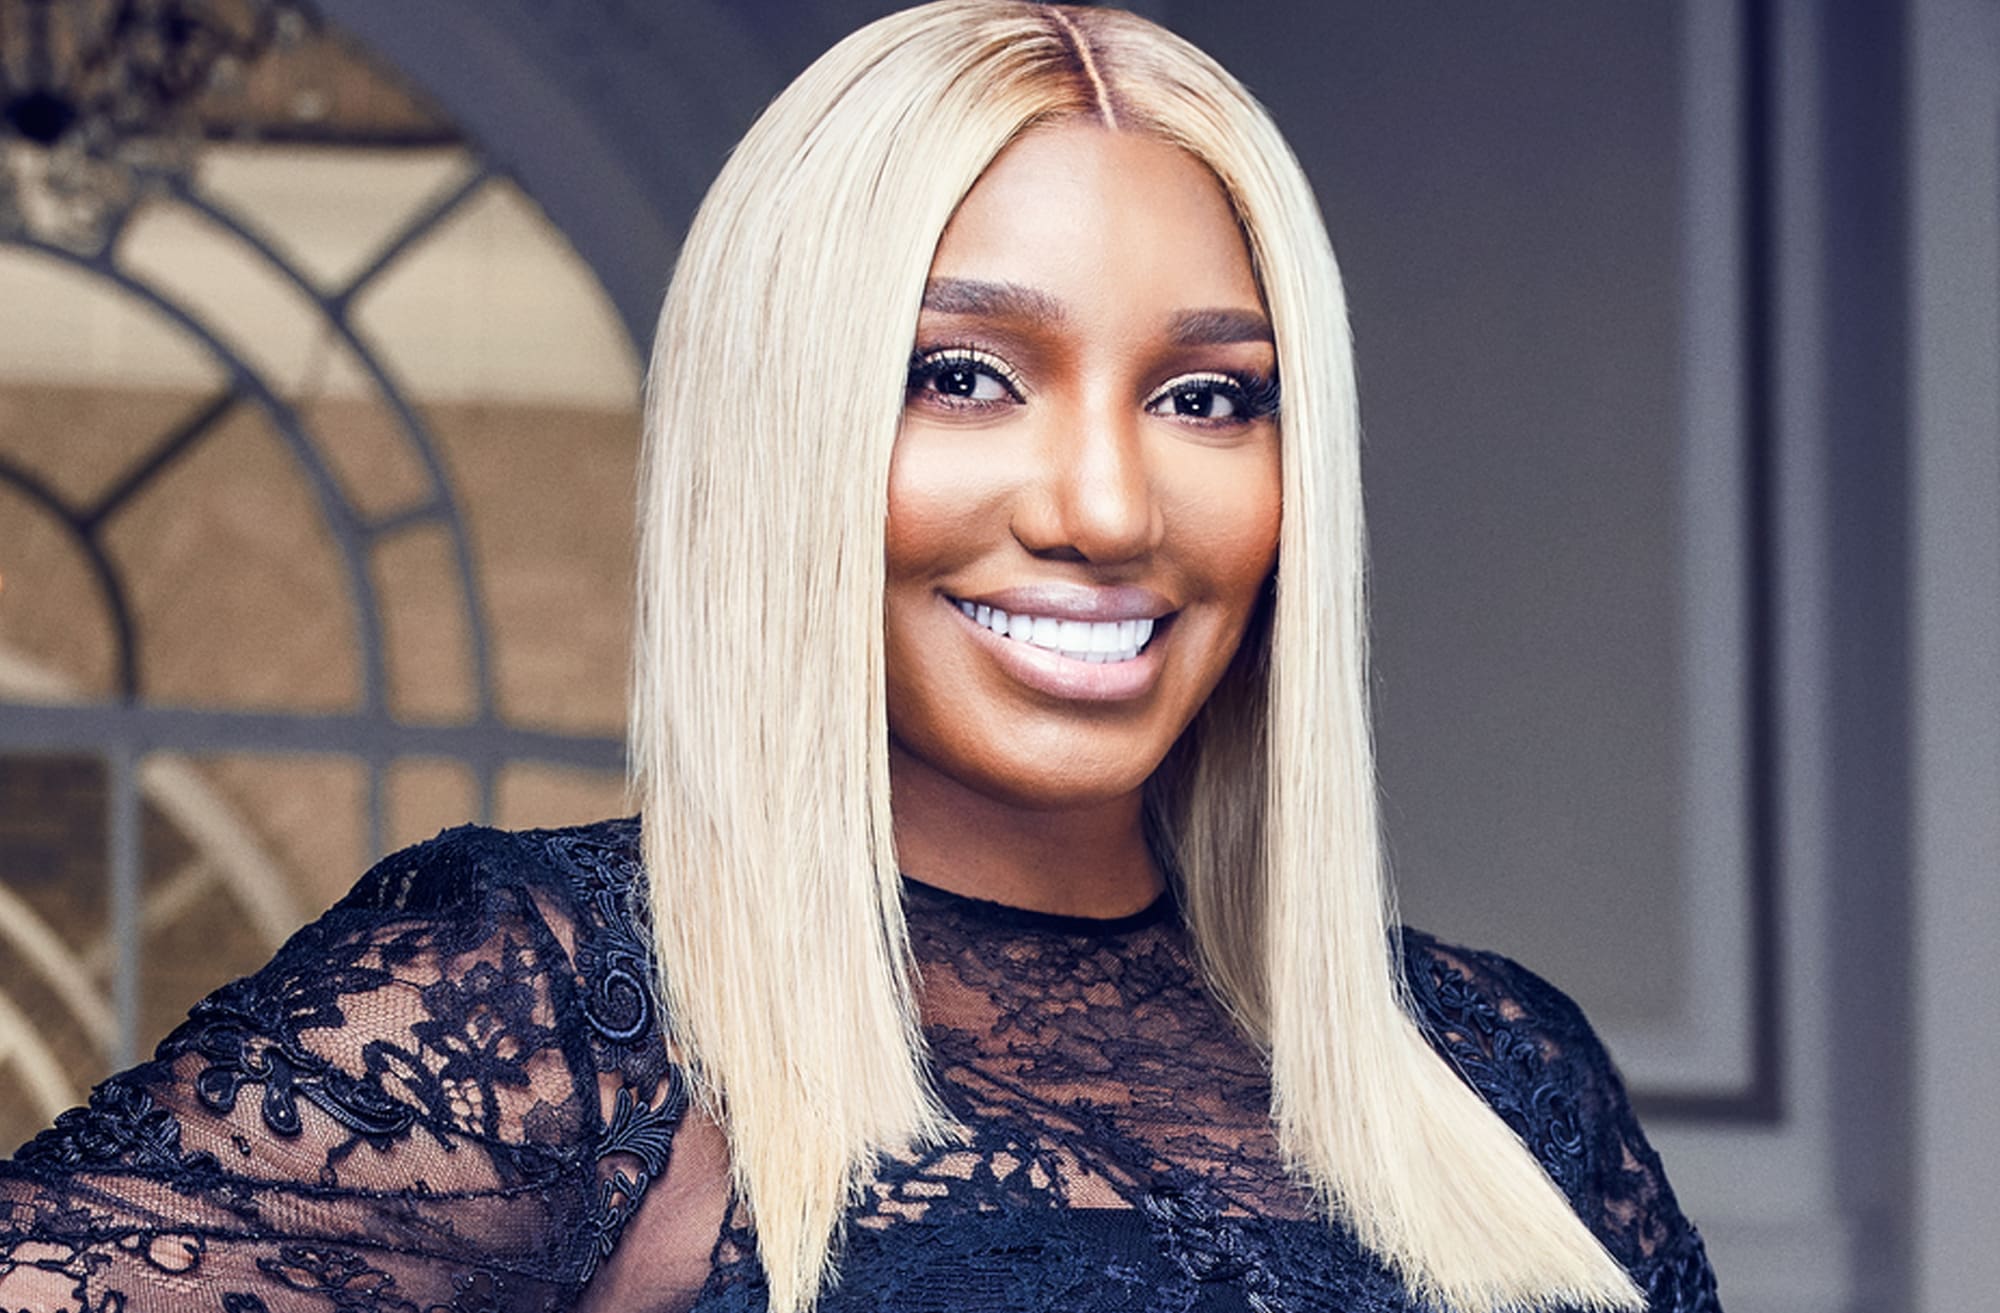 ”nene-leakes-looks-amazing-in-her-latest-pics-check-them-out-here”